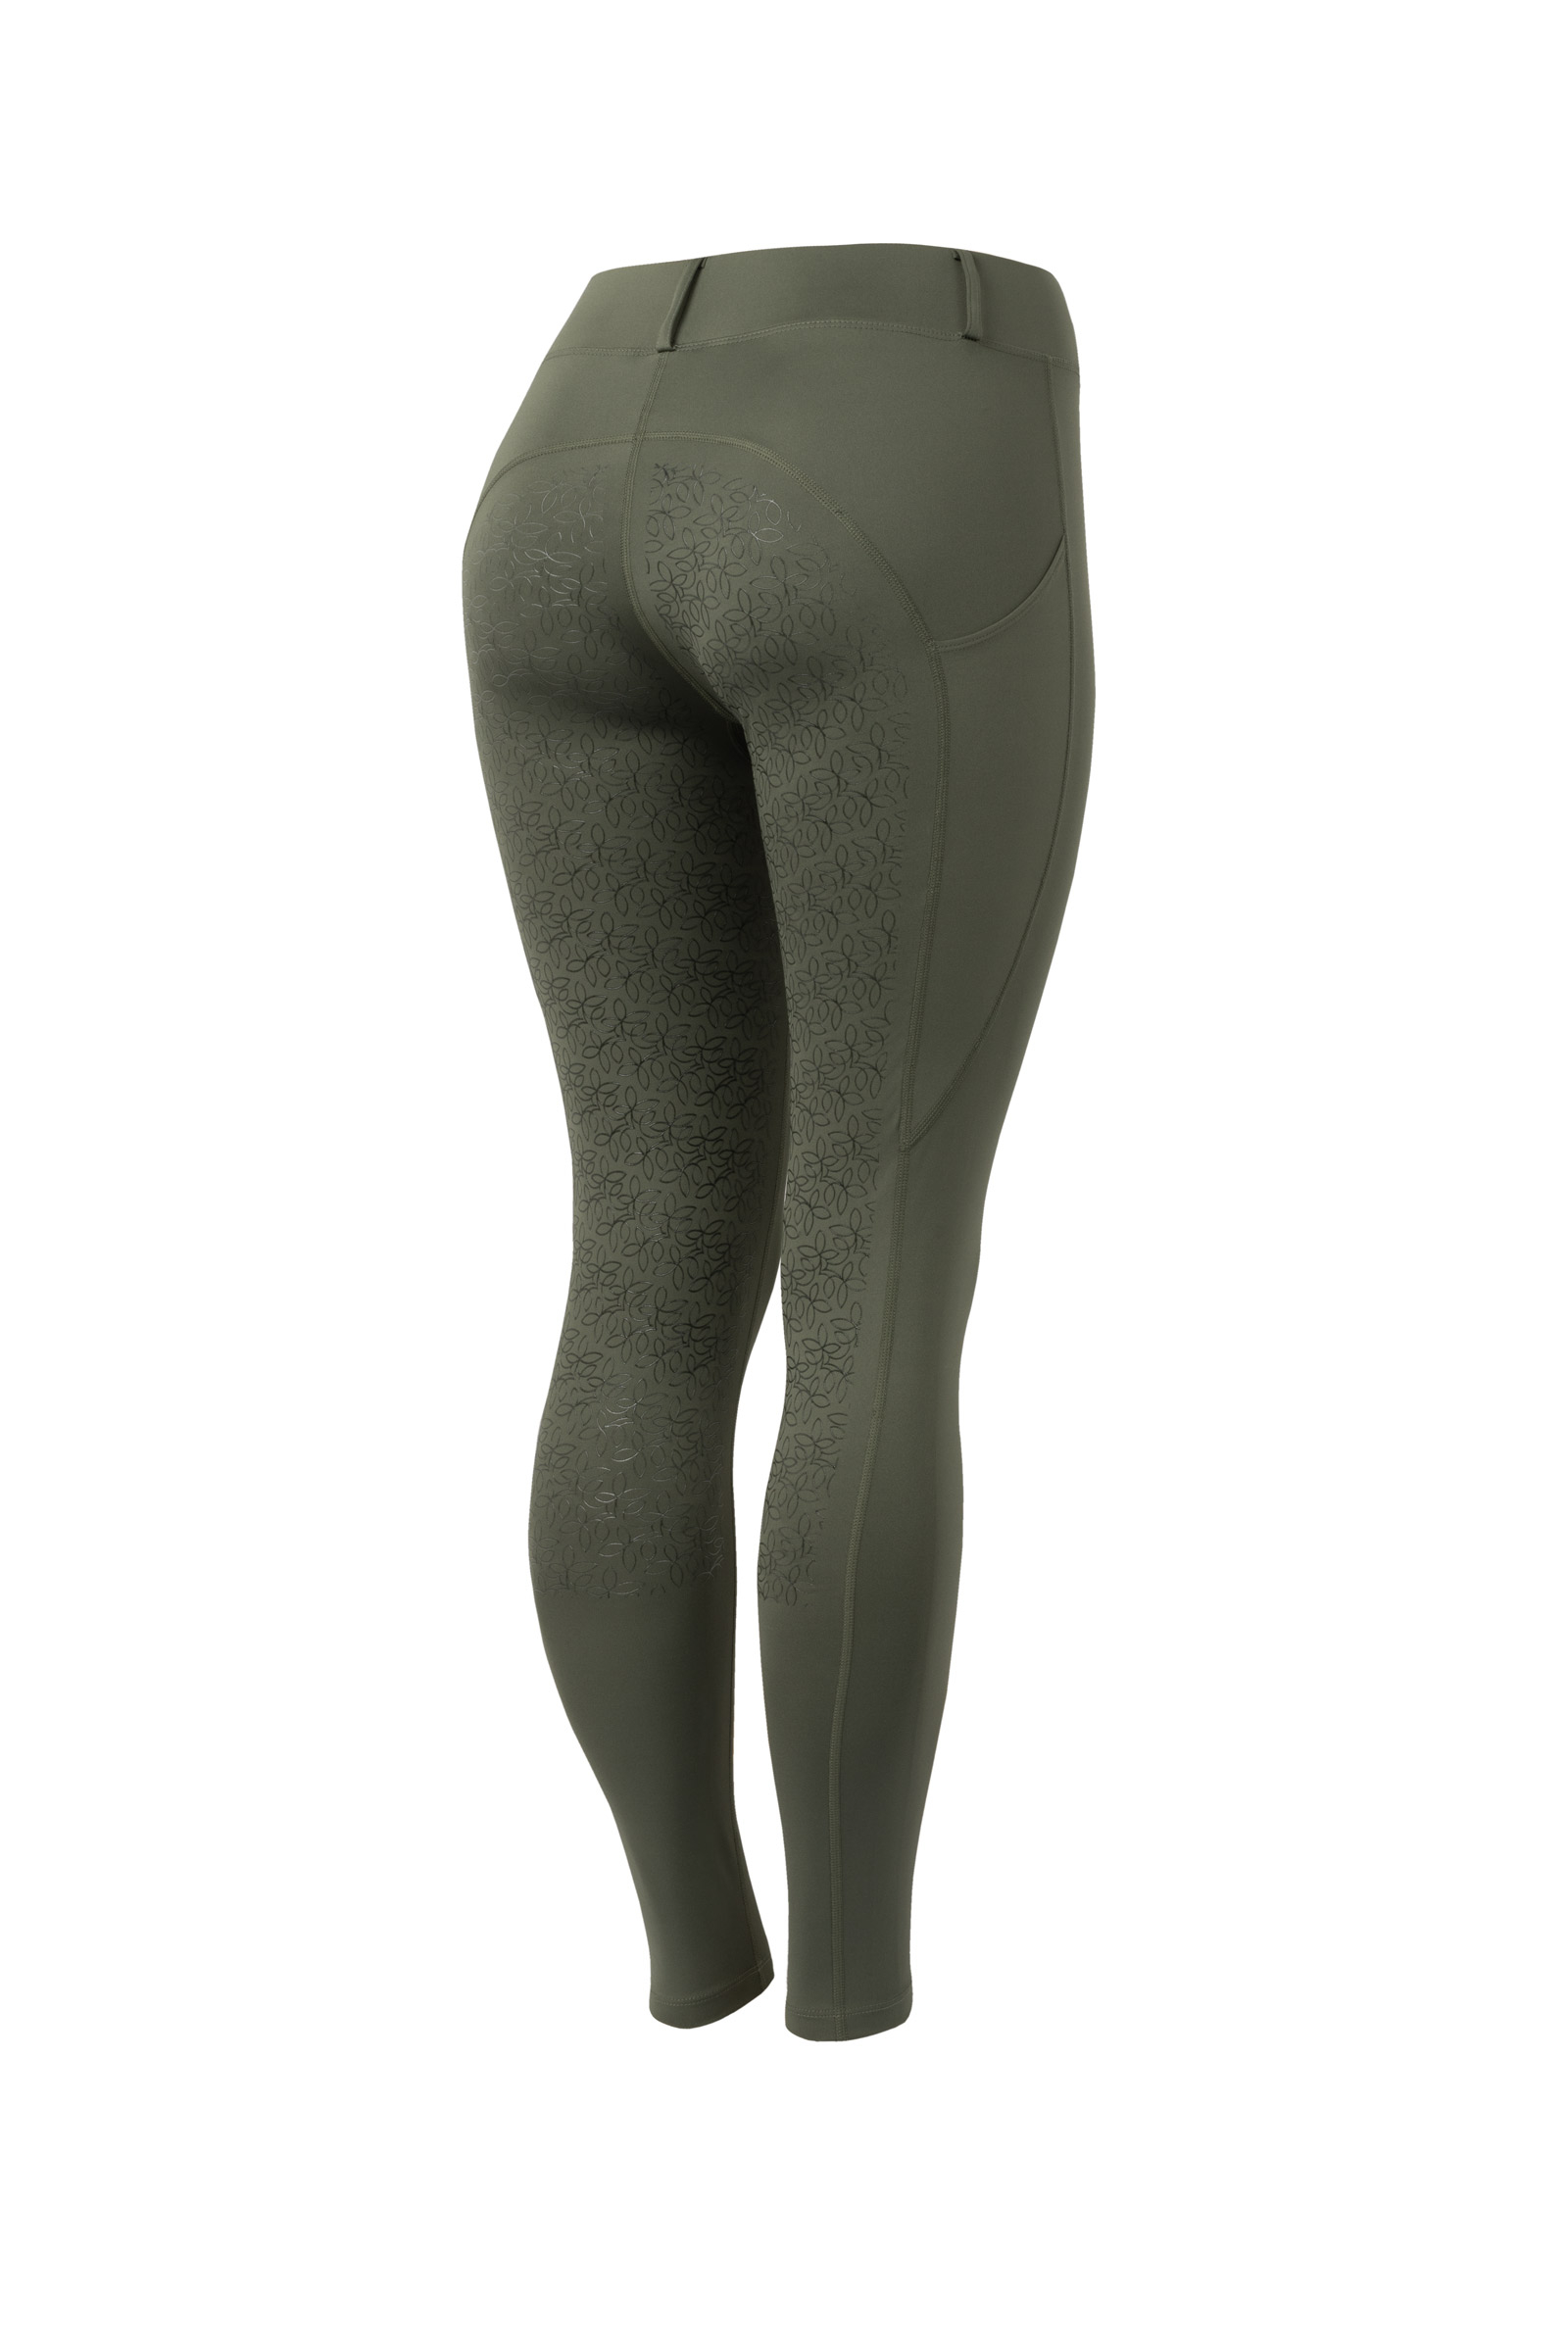 Women's Compression Thermal Leggings - Outsider Co.